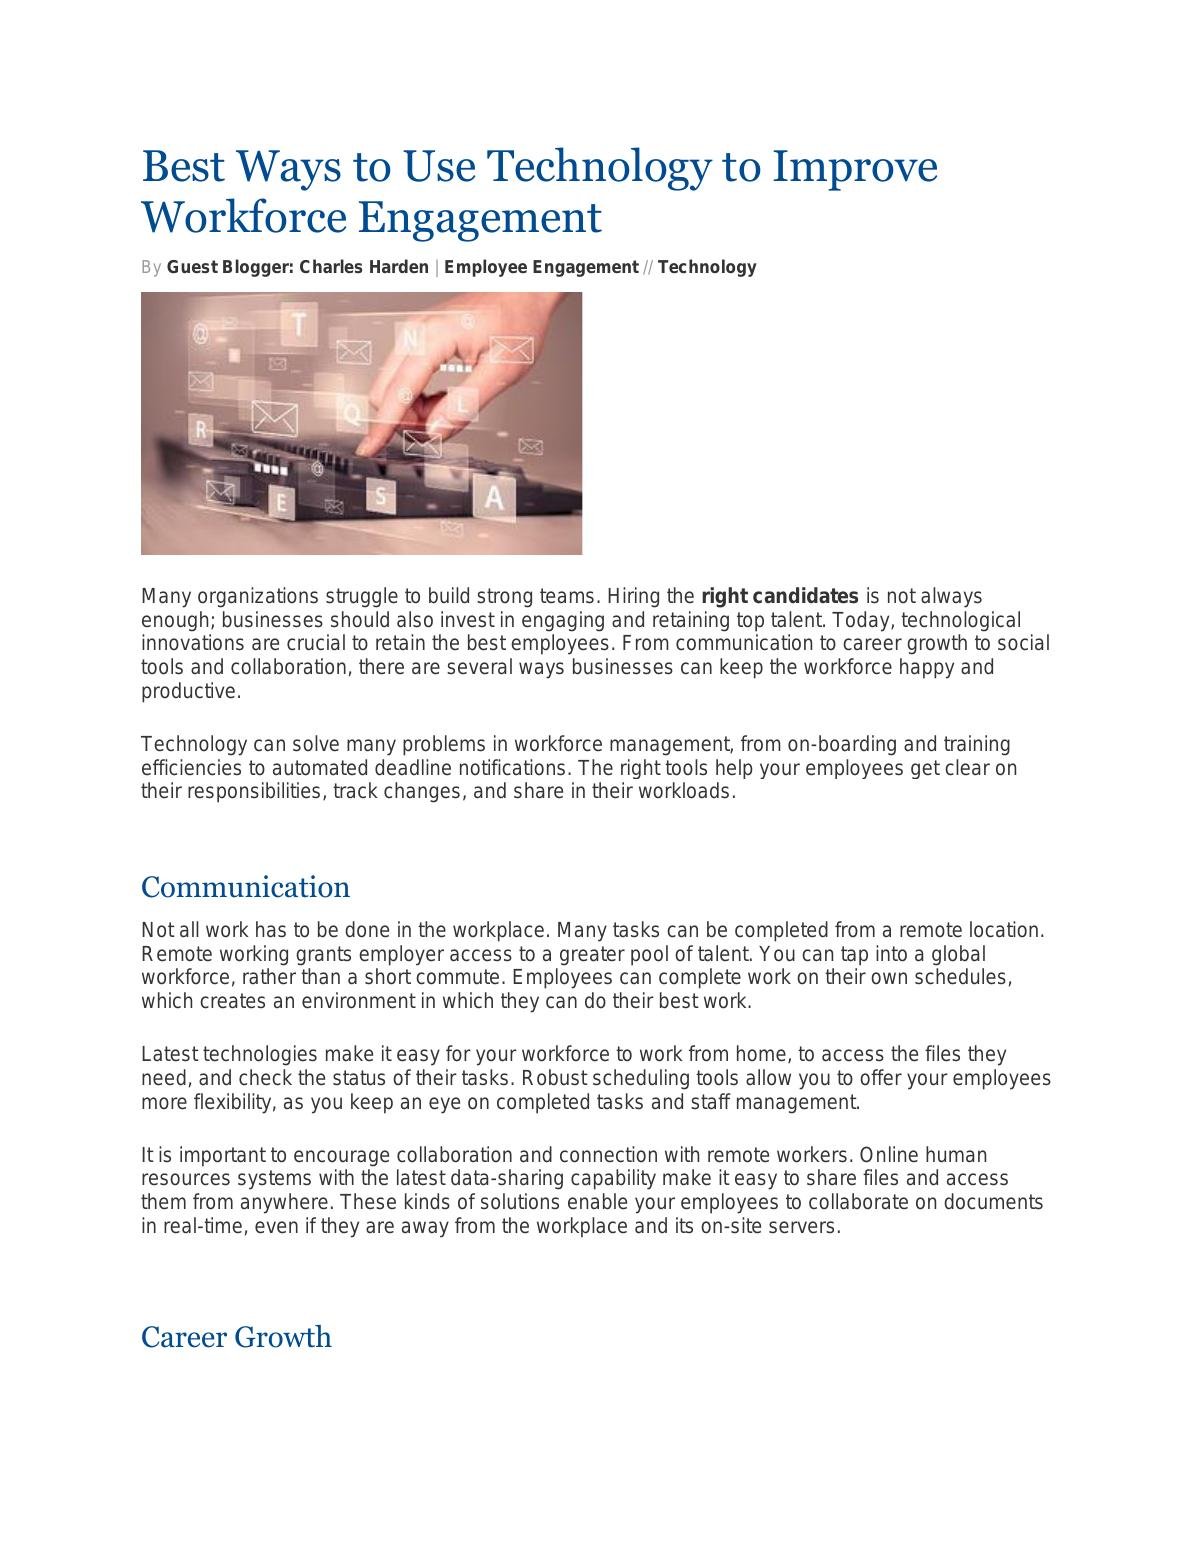 Best Ways to Use Technology to Improve Workforce Engagement